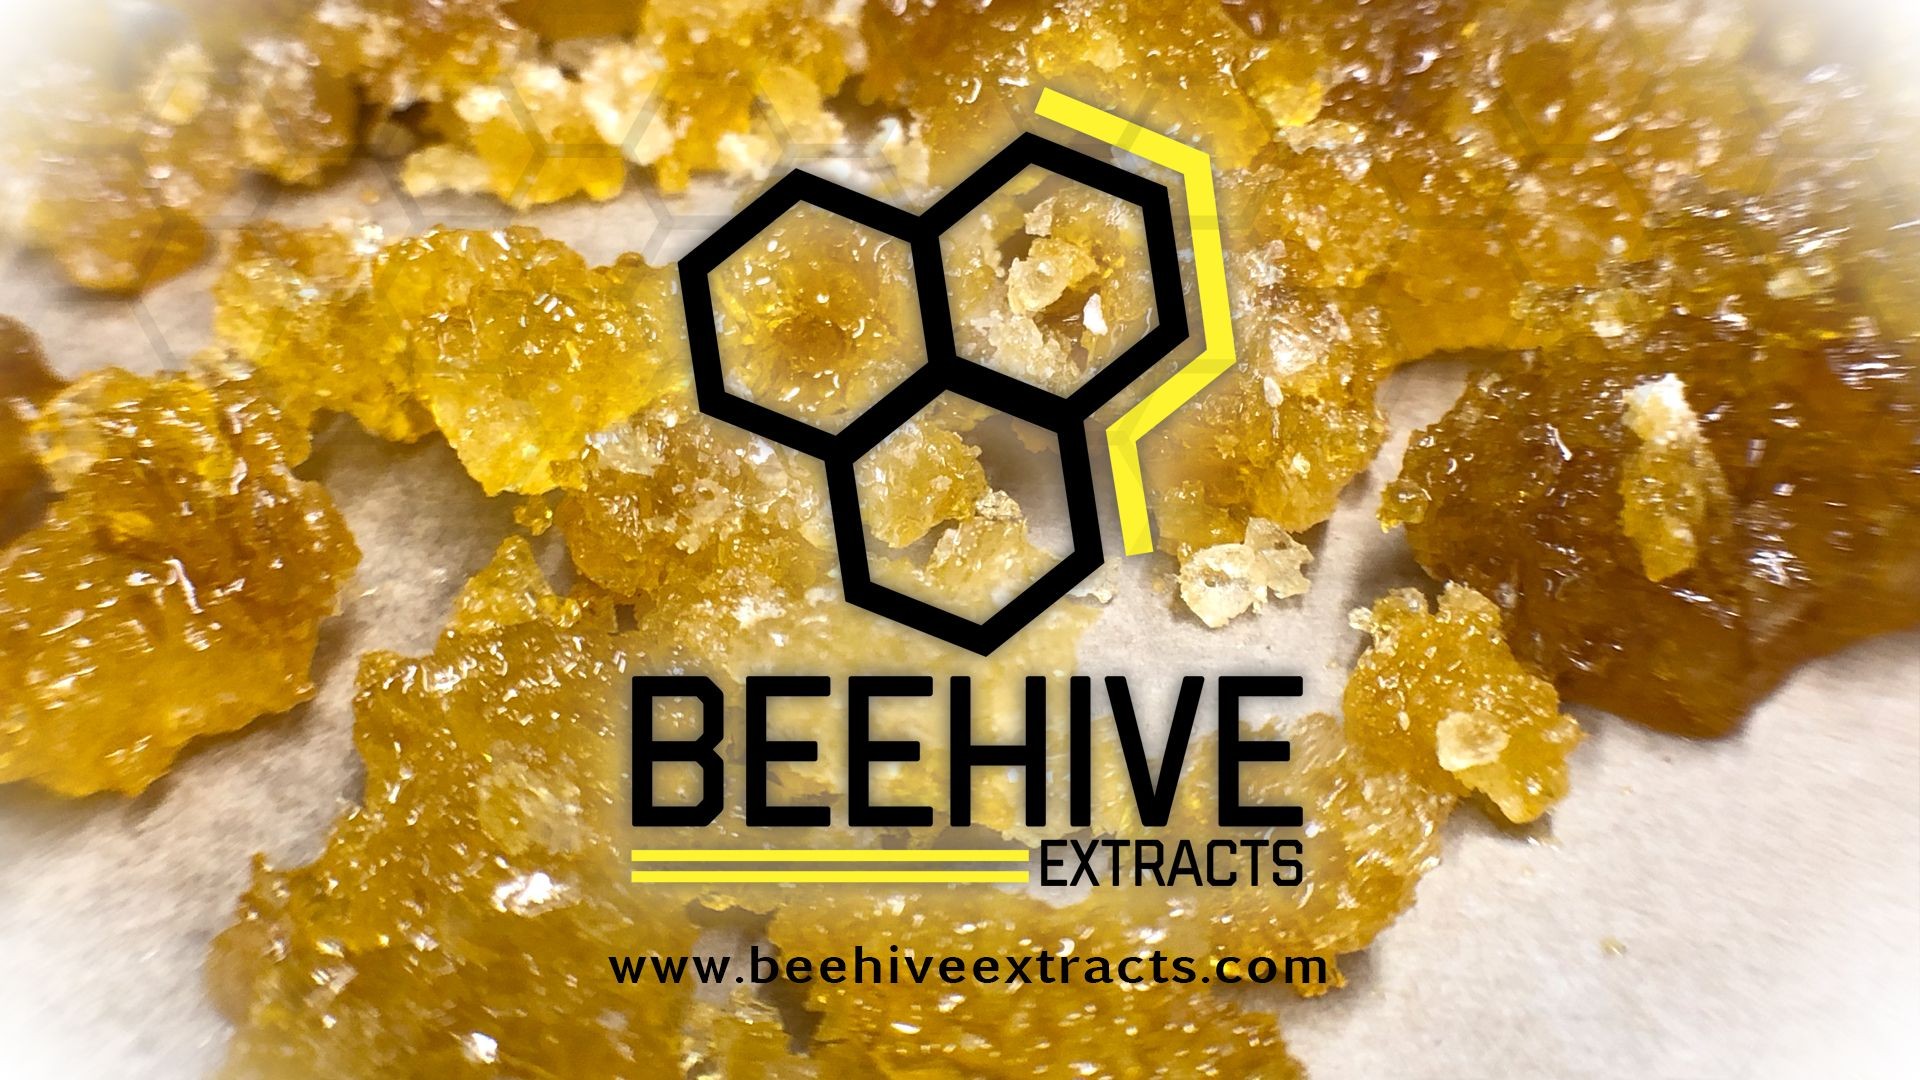 New Products from Beehive Extracts!